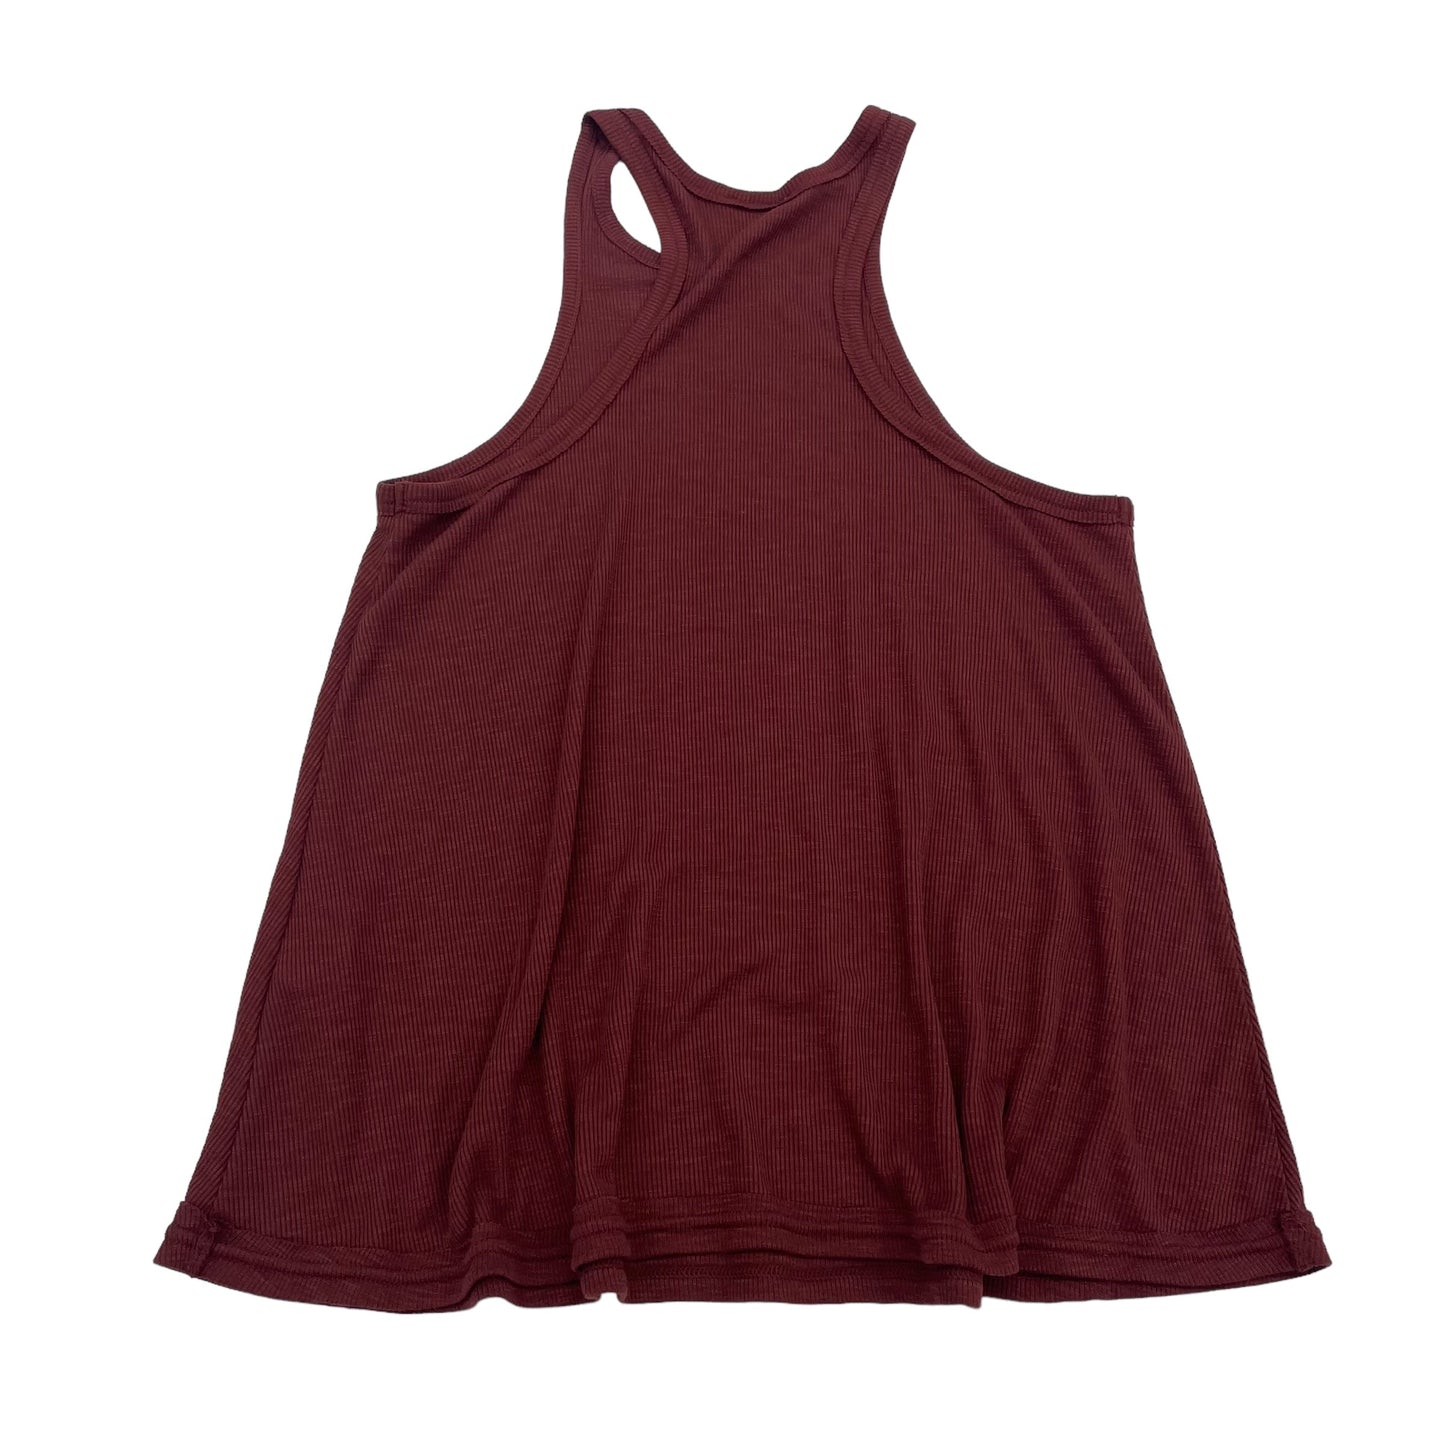 RED TANK TOP by FREE PEOPLE Size:S